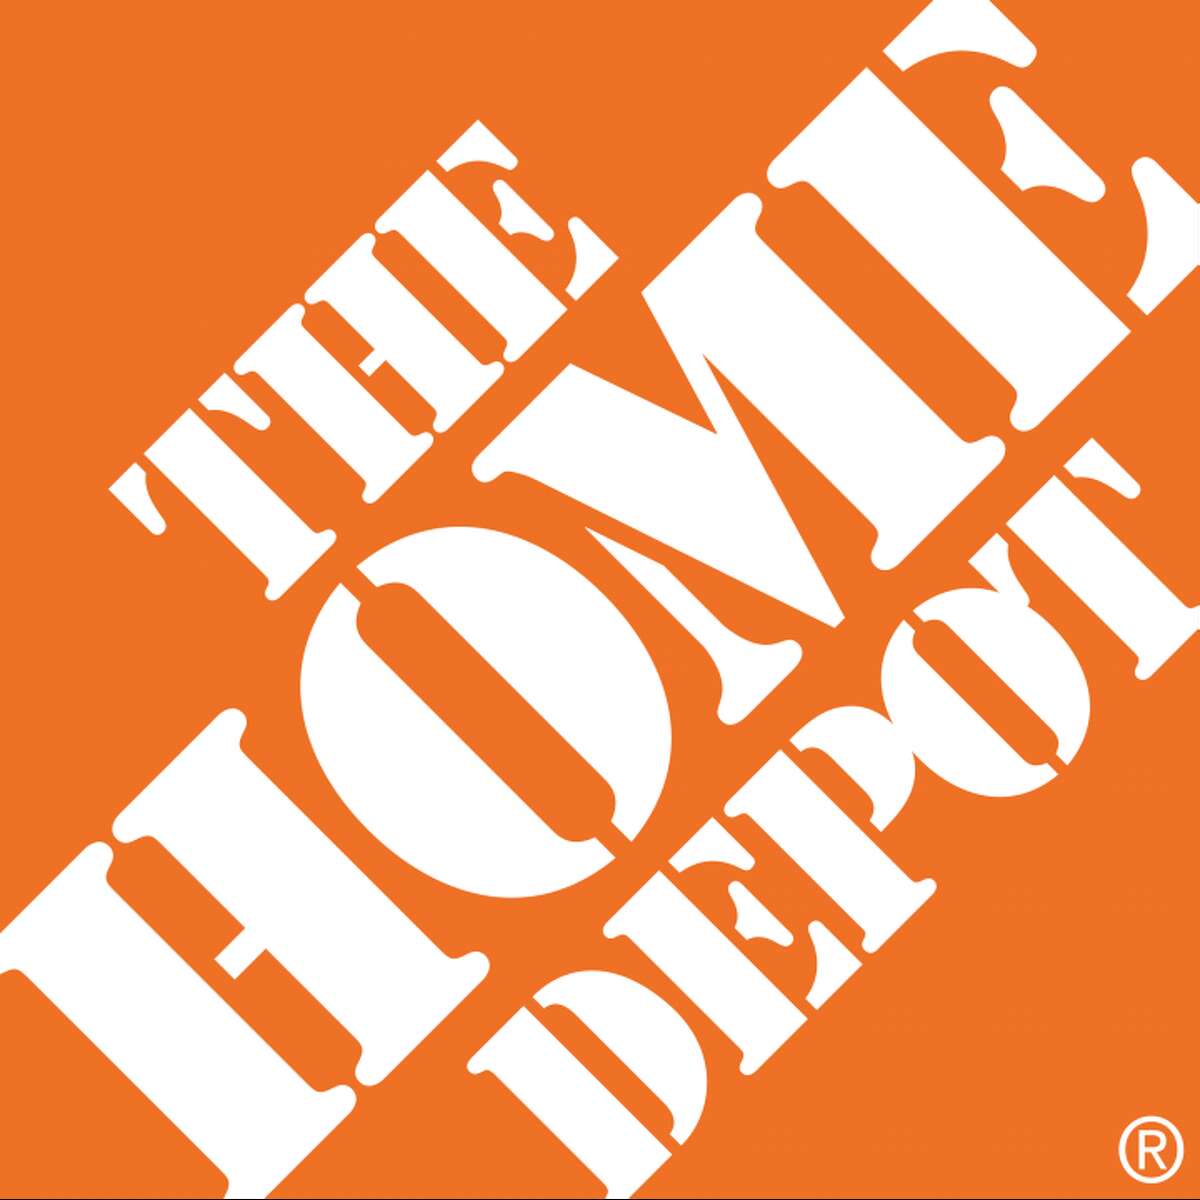 The Home Depot in Trumbull is recovering from an employee theft ring that lasted from January 2015 to October 2015.